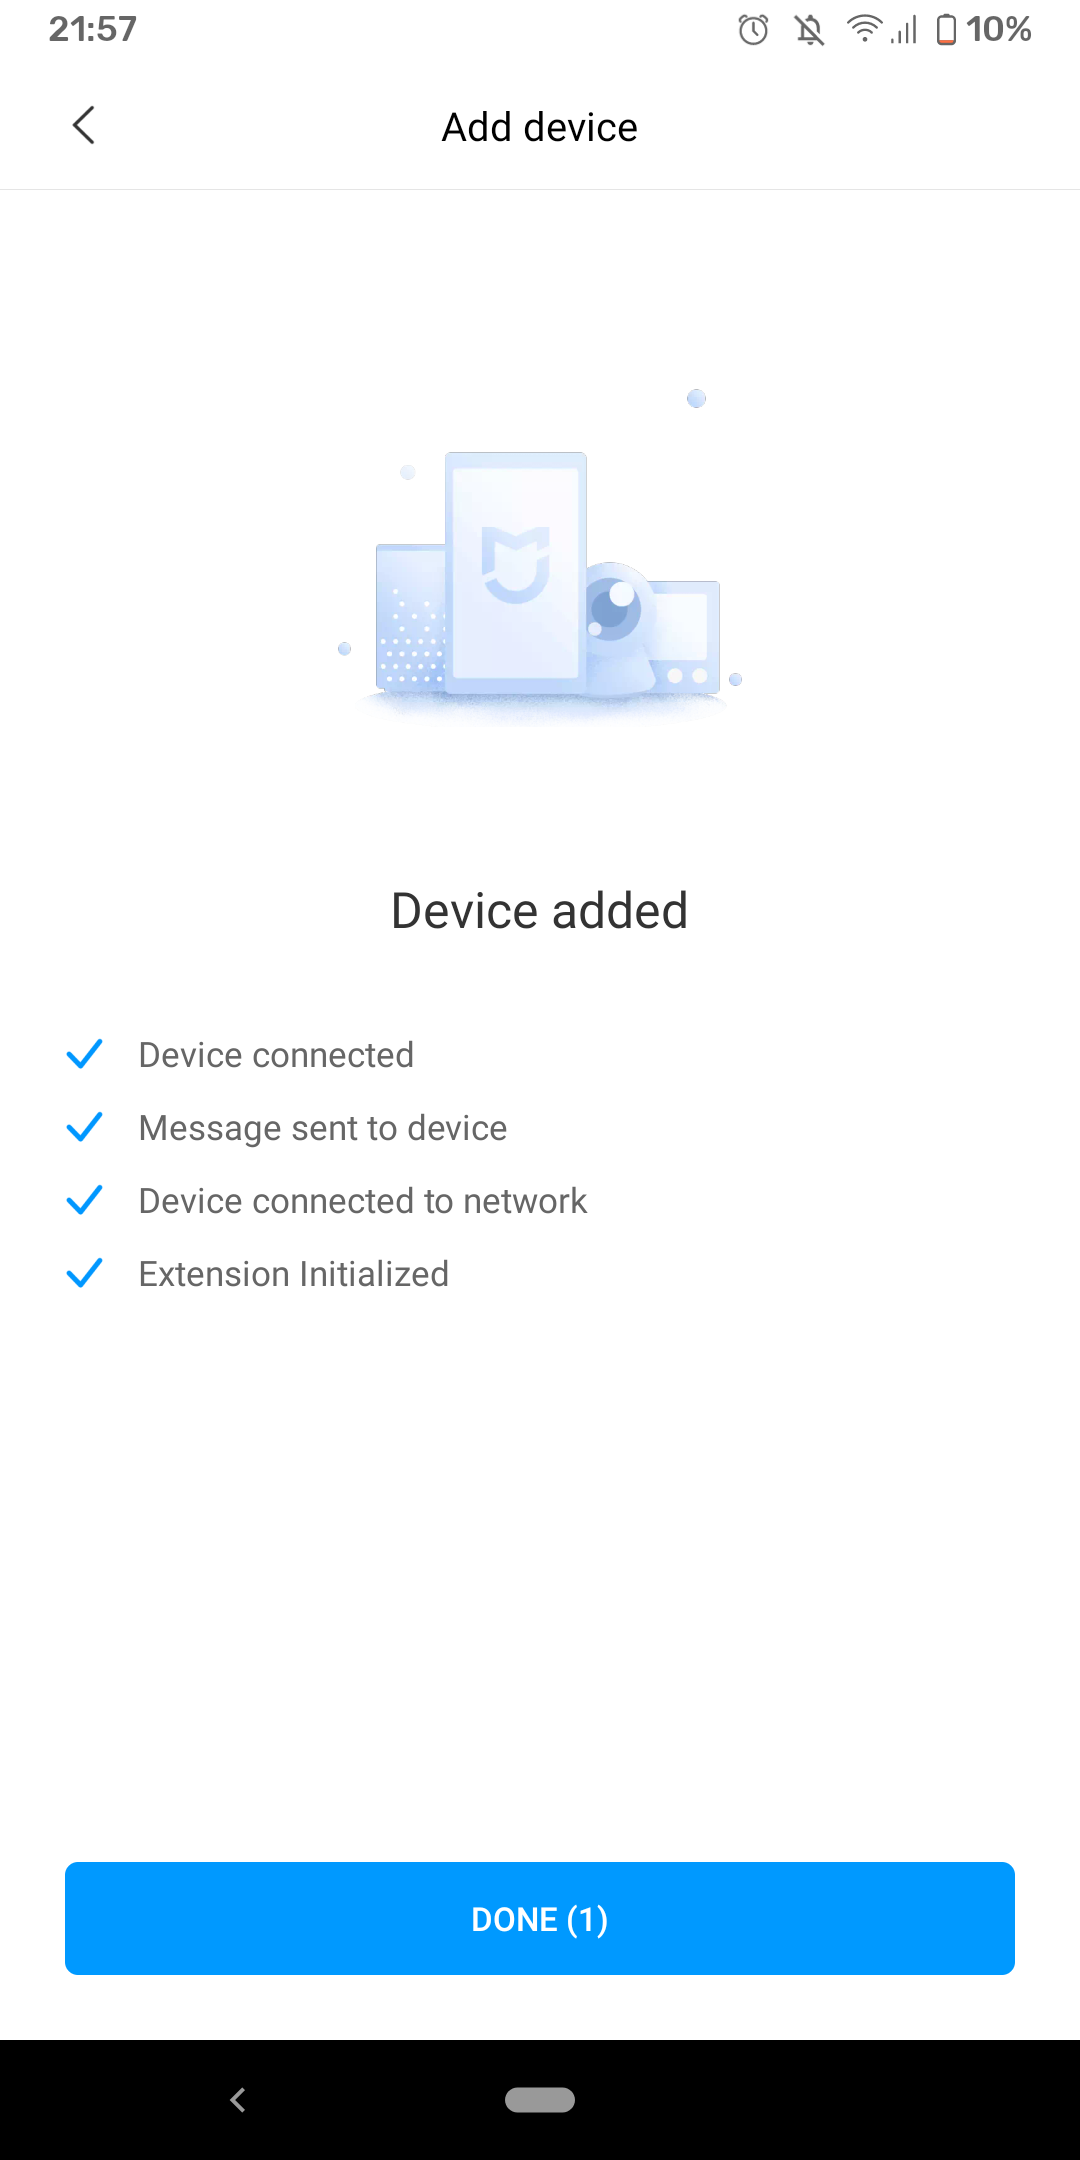 Adding a new device to Xiaomi Home, successfully added